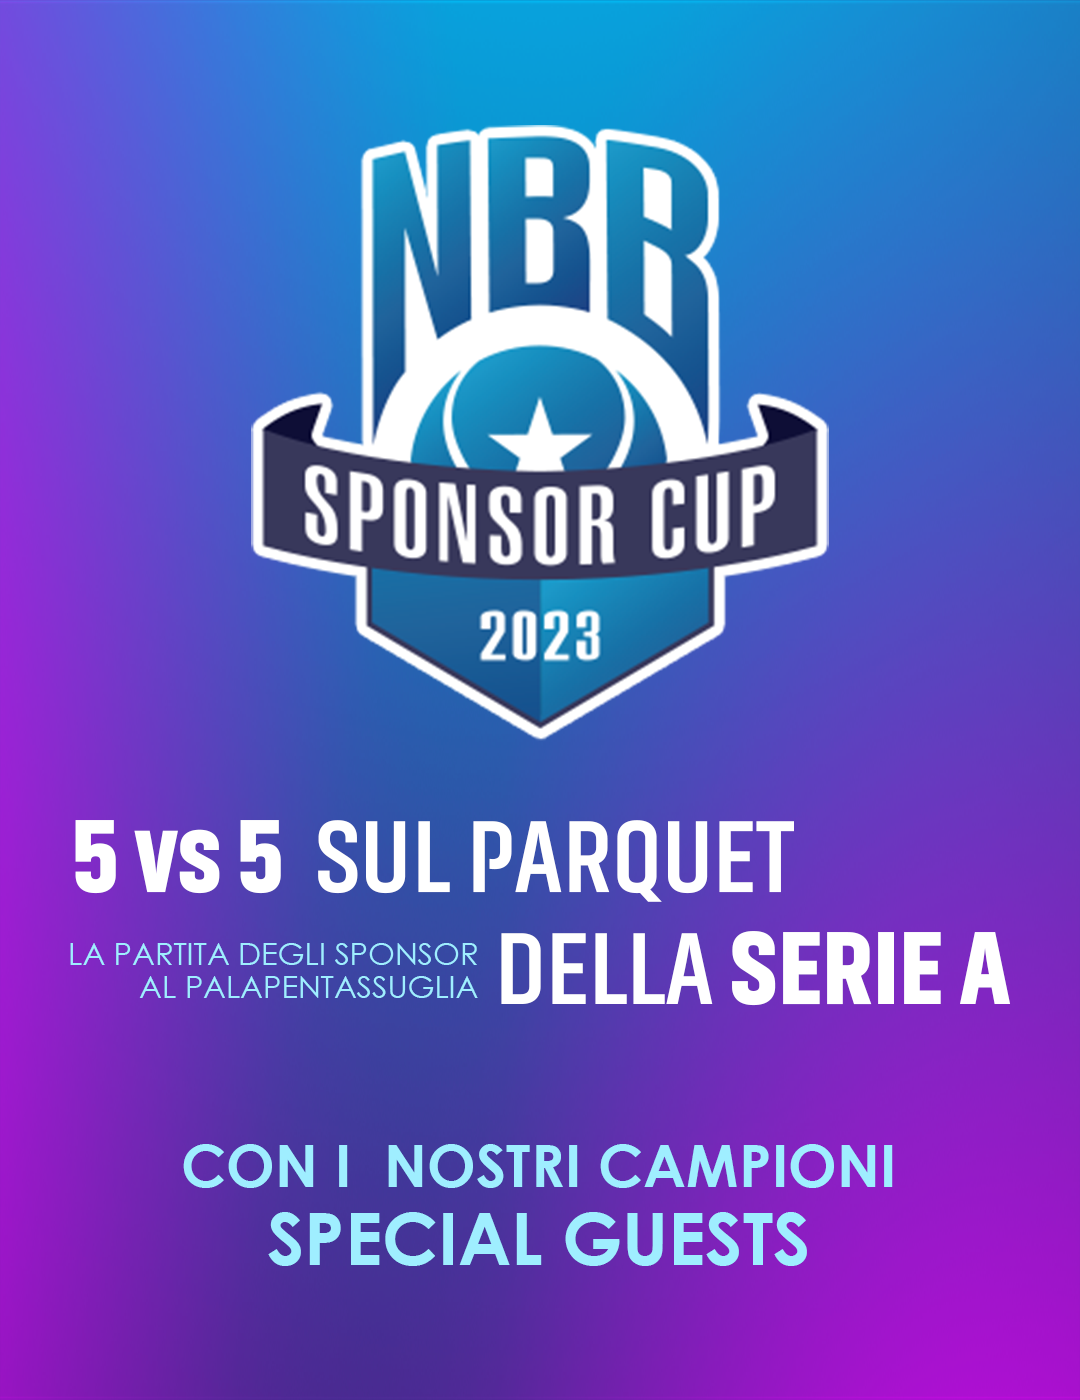 https://www.newbasketbrindisi.it/wp-content/uploads/2023/04/Home-Sito-DEF-11-mobile.png